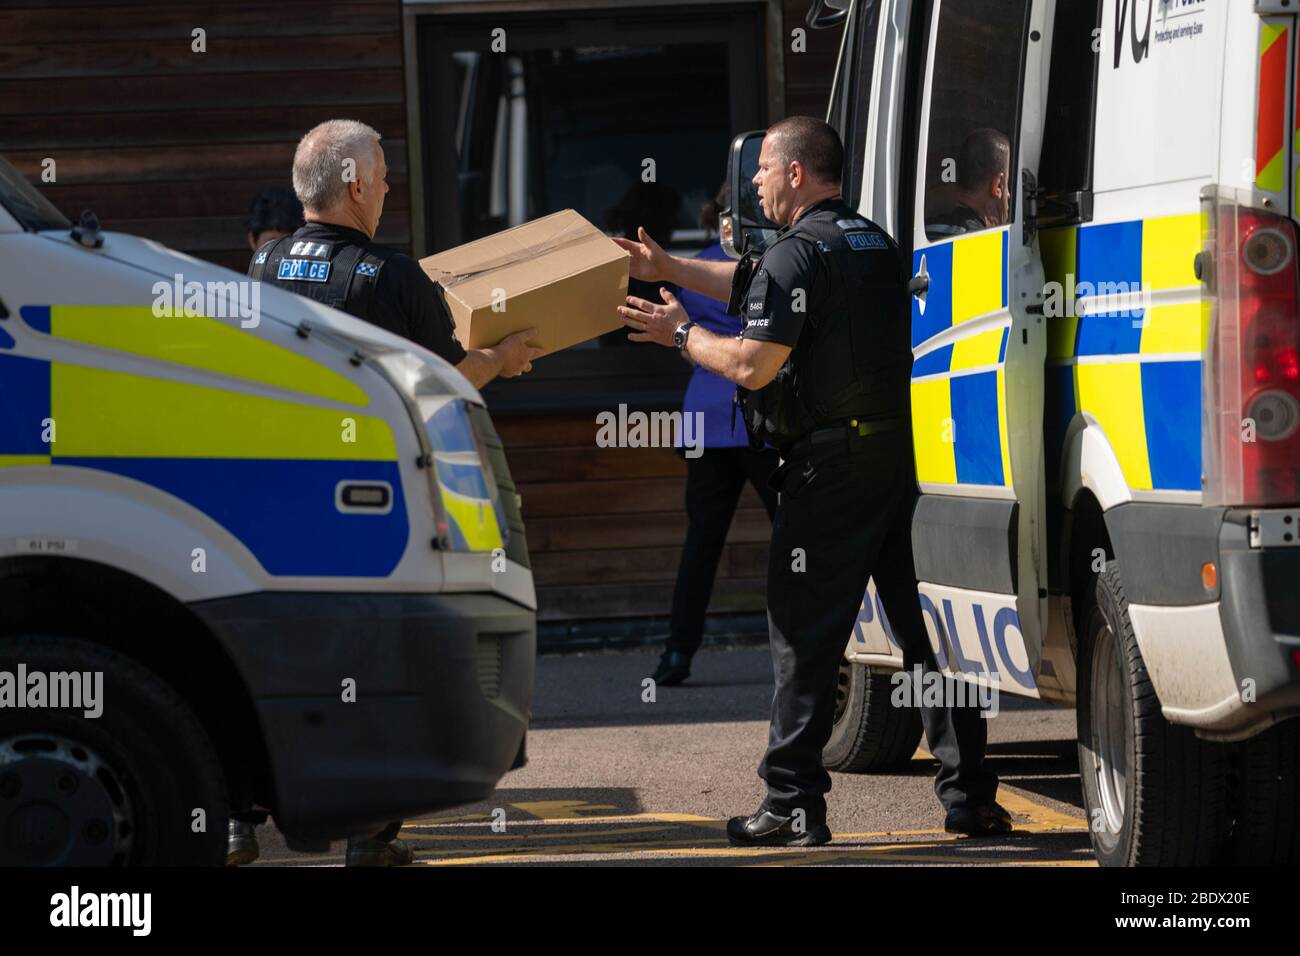 Brentwood Essex, UK. 10th Apr, 2020. NHS Personal Protective Equipment (PPE) for covid-19 arrives at a distribution hub at Brentwood Community Hospital. Essex Police, the Army and NHS assist in the distribution of PPE throughout the area. Credit: Ian Davidson/Alamy Live News Stock Photo